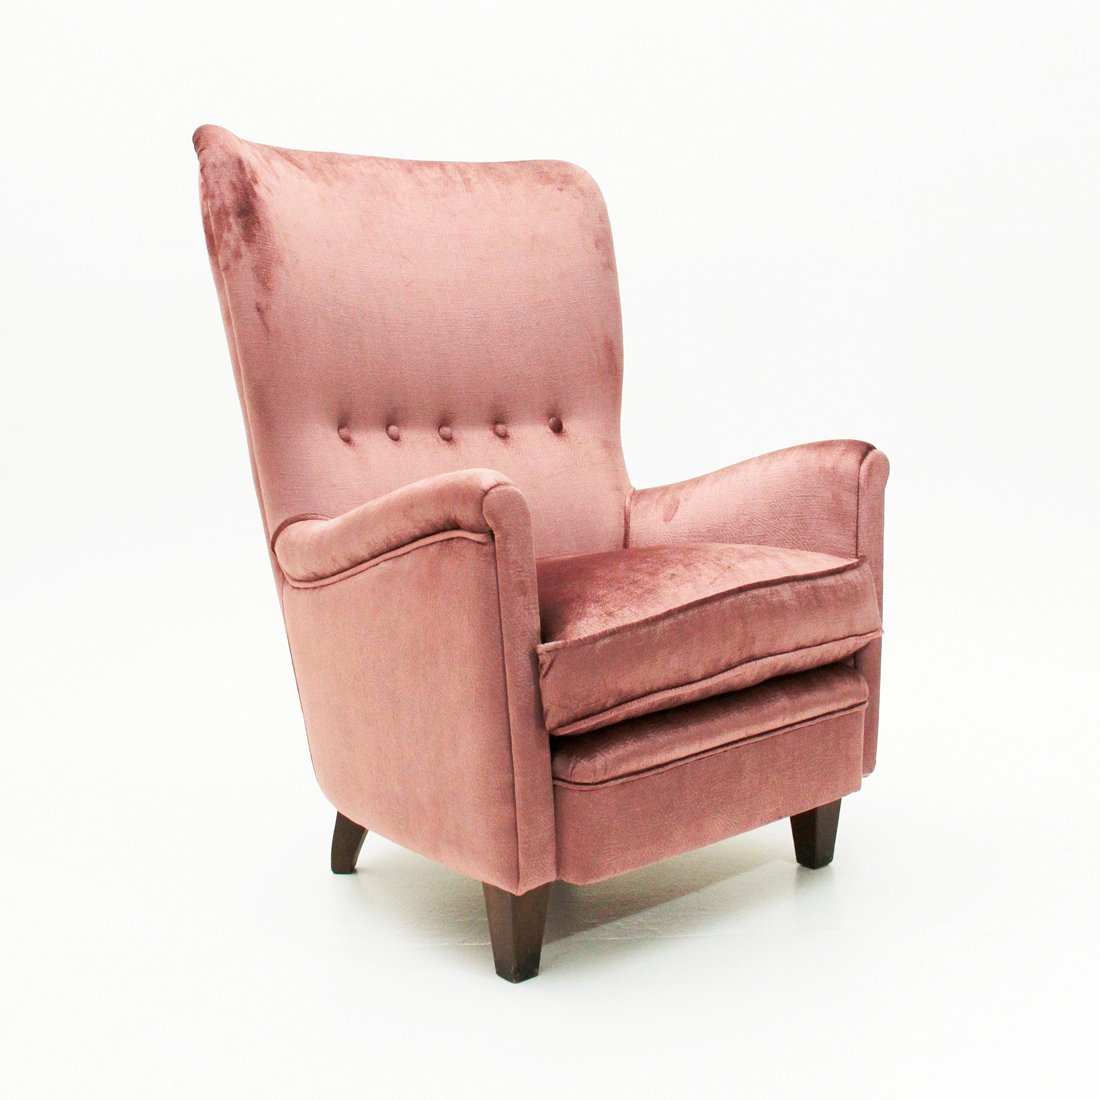 Italian Pink Velvet Lounge Chair, 1950s for sale at Pamono